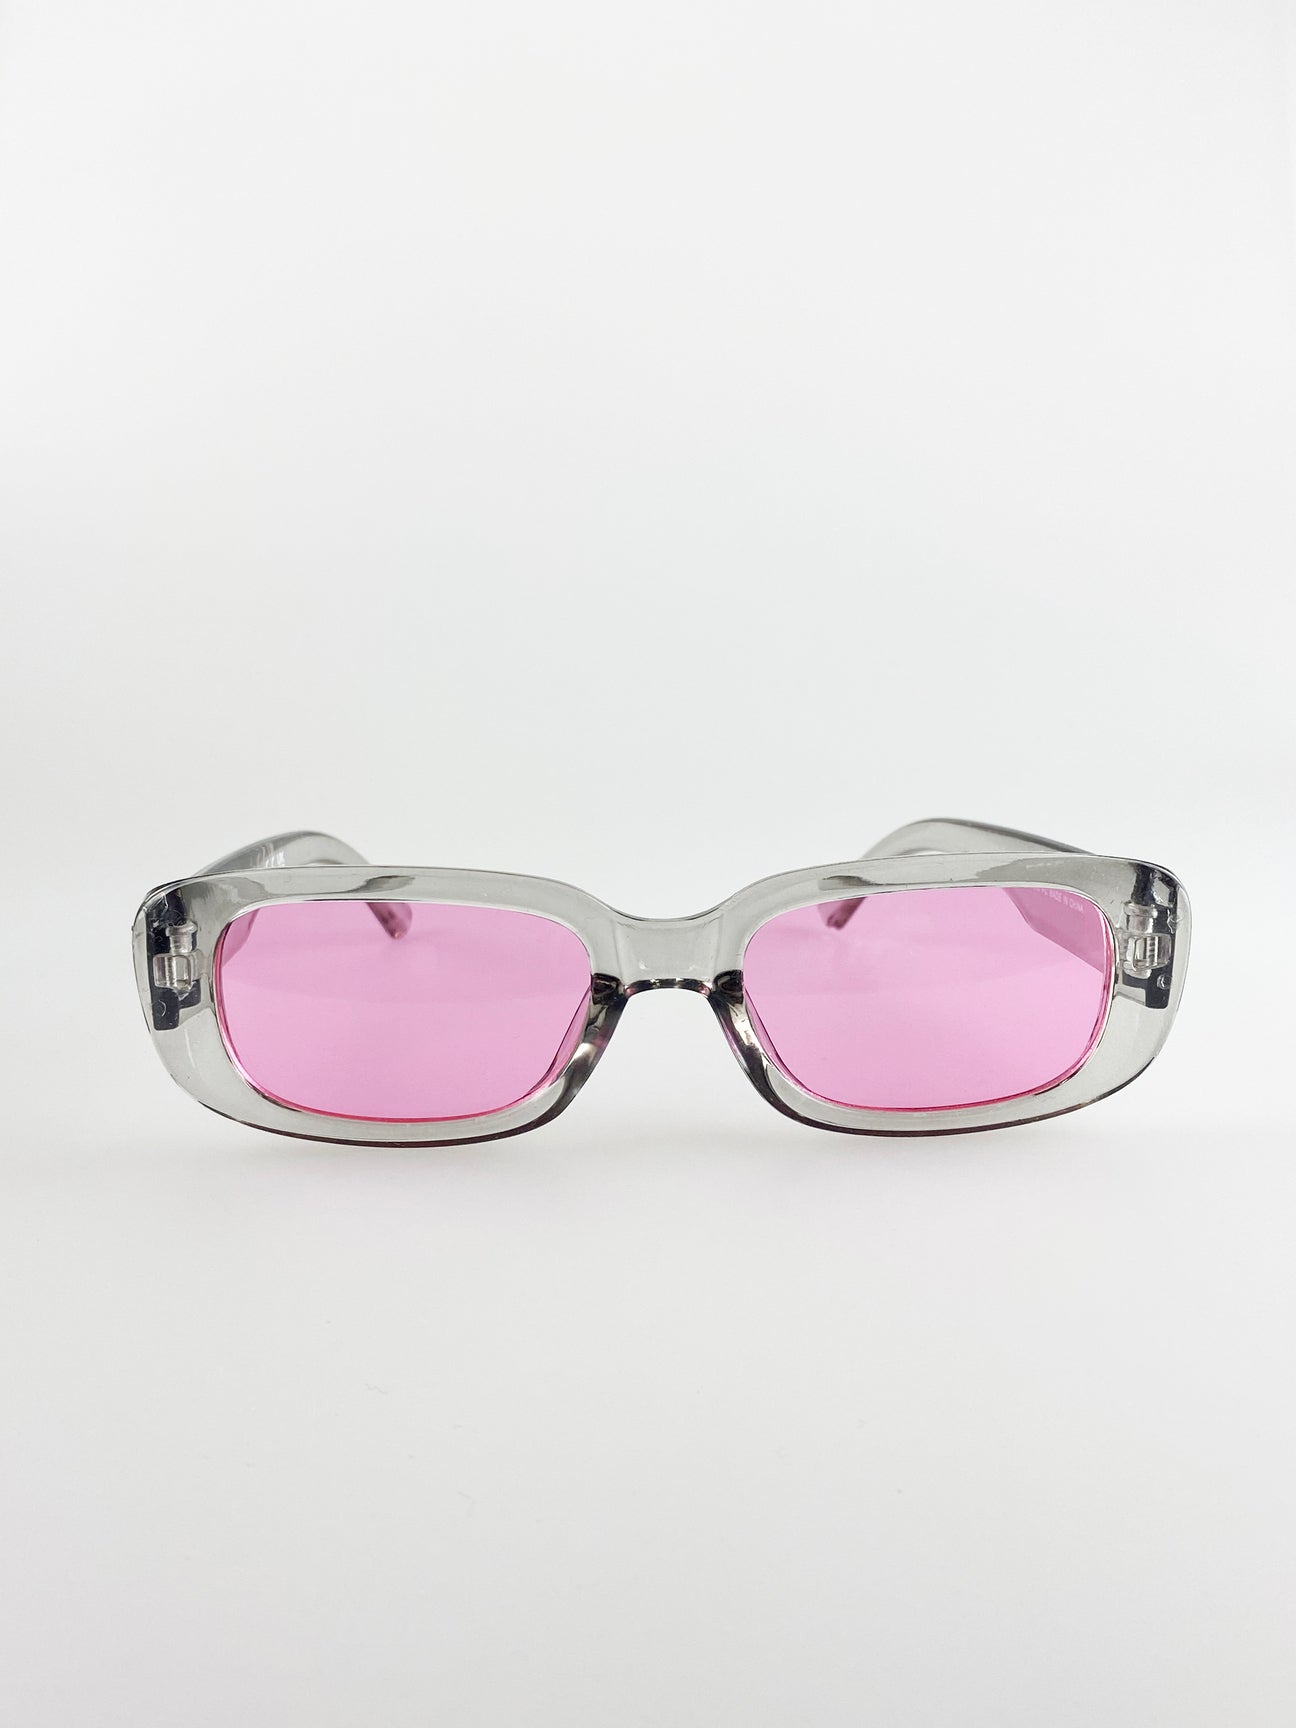 Retro Rectangle Sunglasses With Pink Lenses and Light Gray Frame